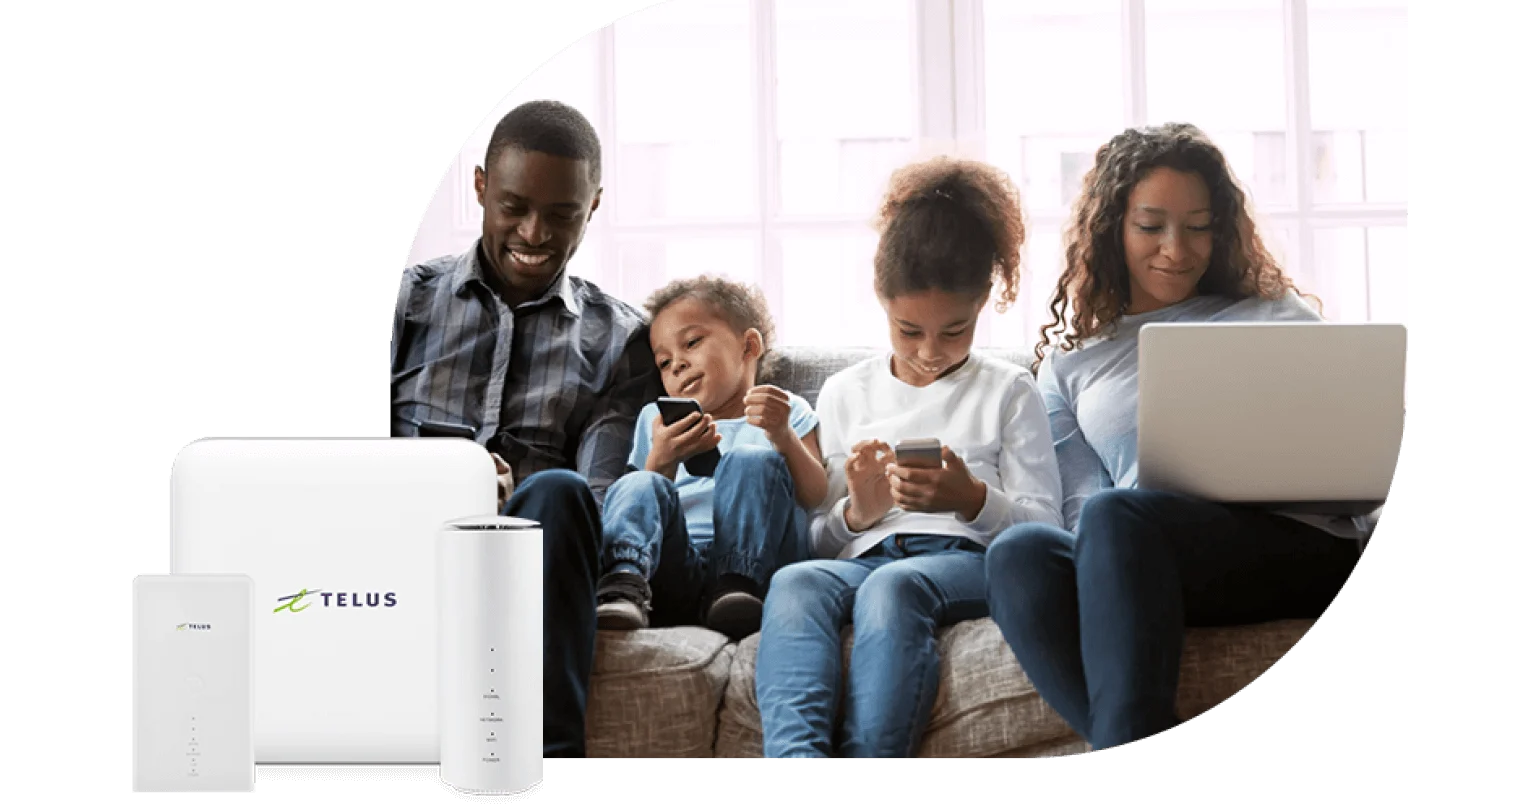 An image showing TELUS 5G Internet devices beside an image of a family seated together interacting with each other and a variety of electronic devices.